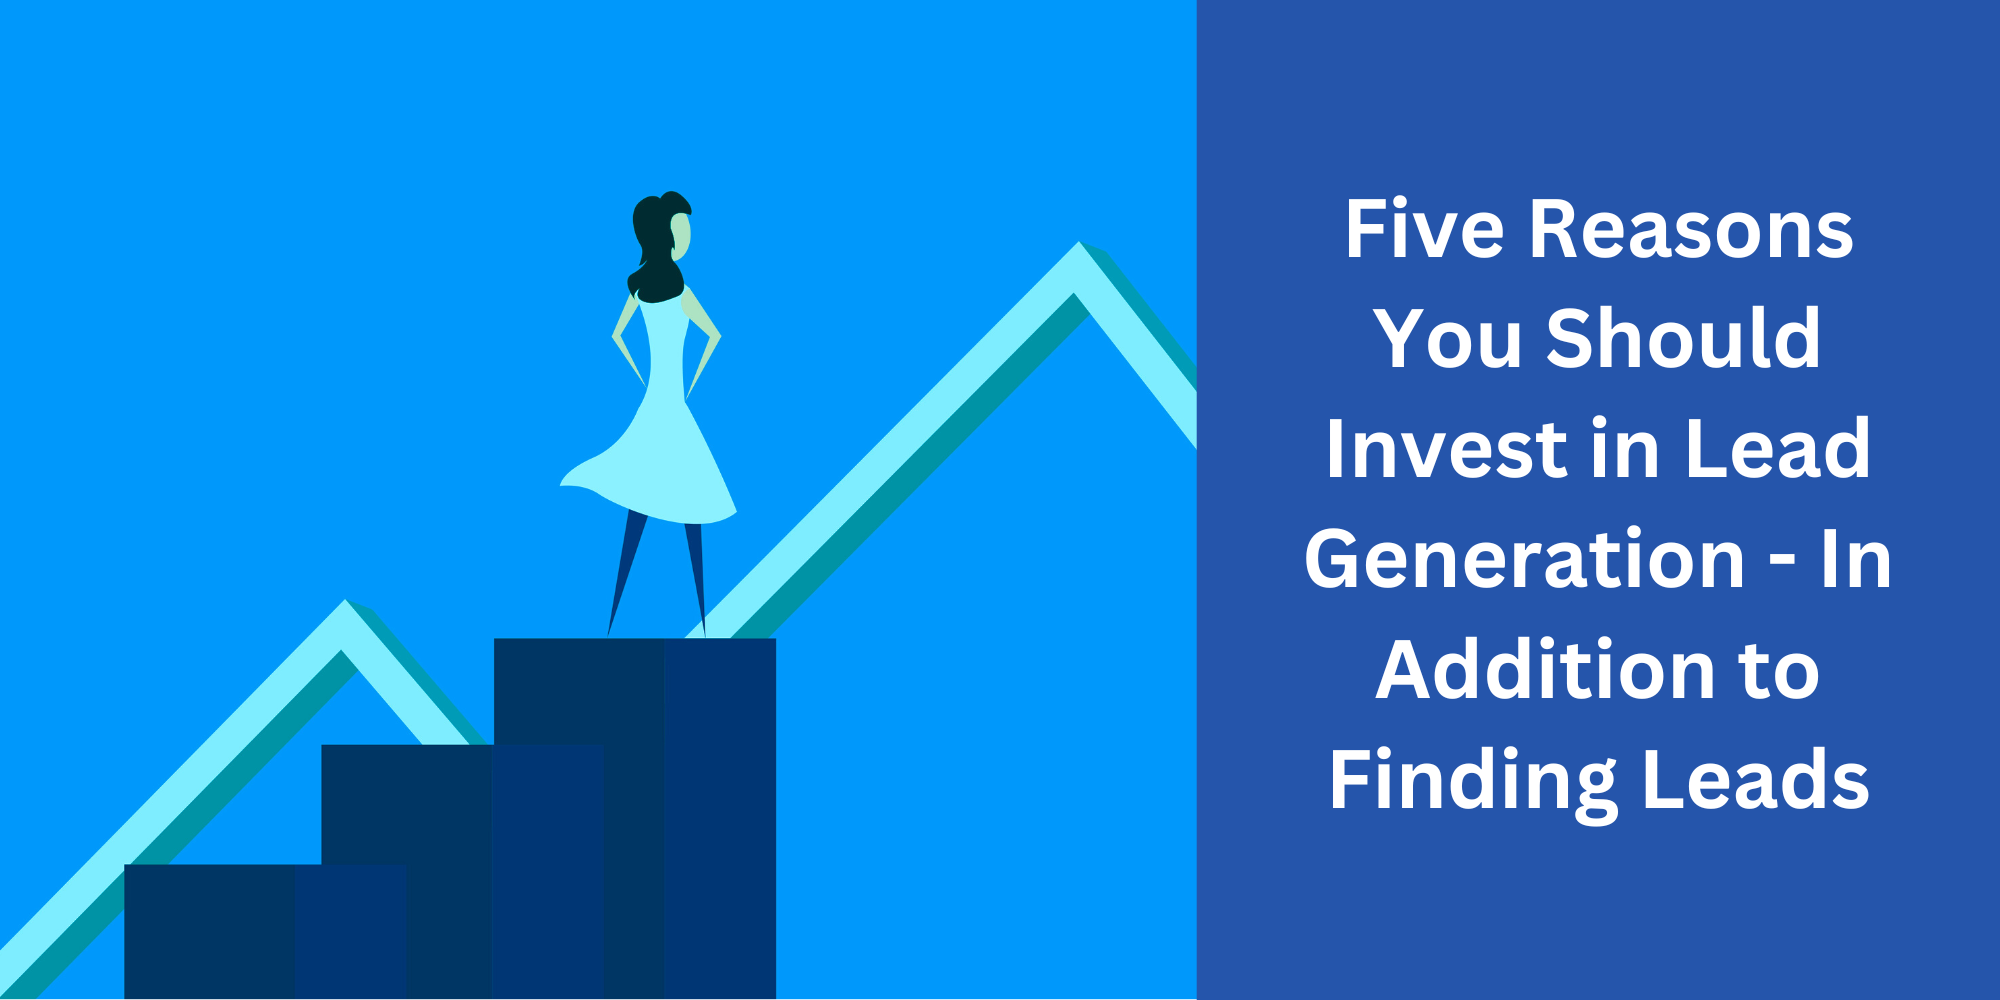 Featured image for “Five Reasons You Should Invest in Lead Generation – in Addition to Finding Leads”